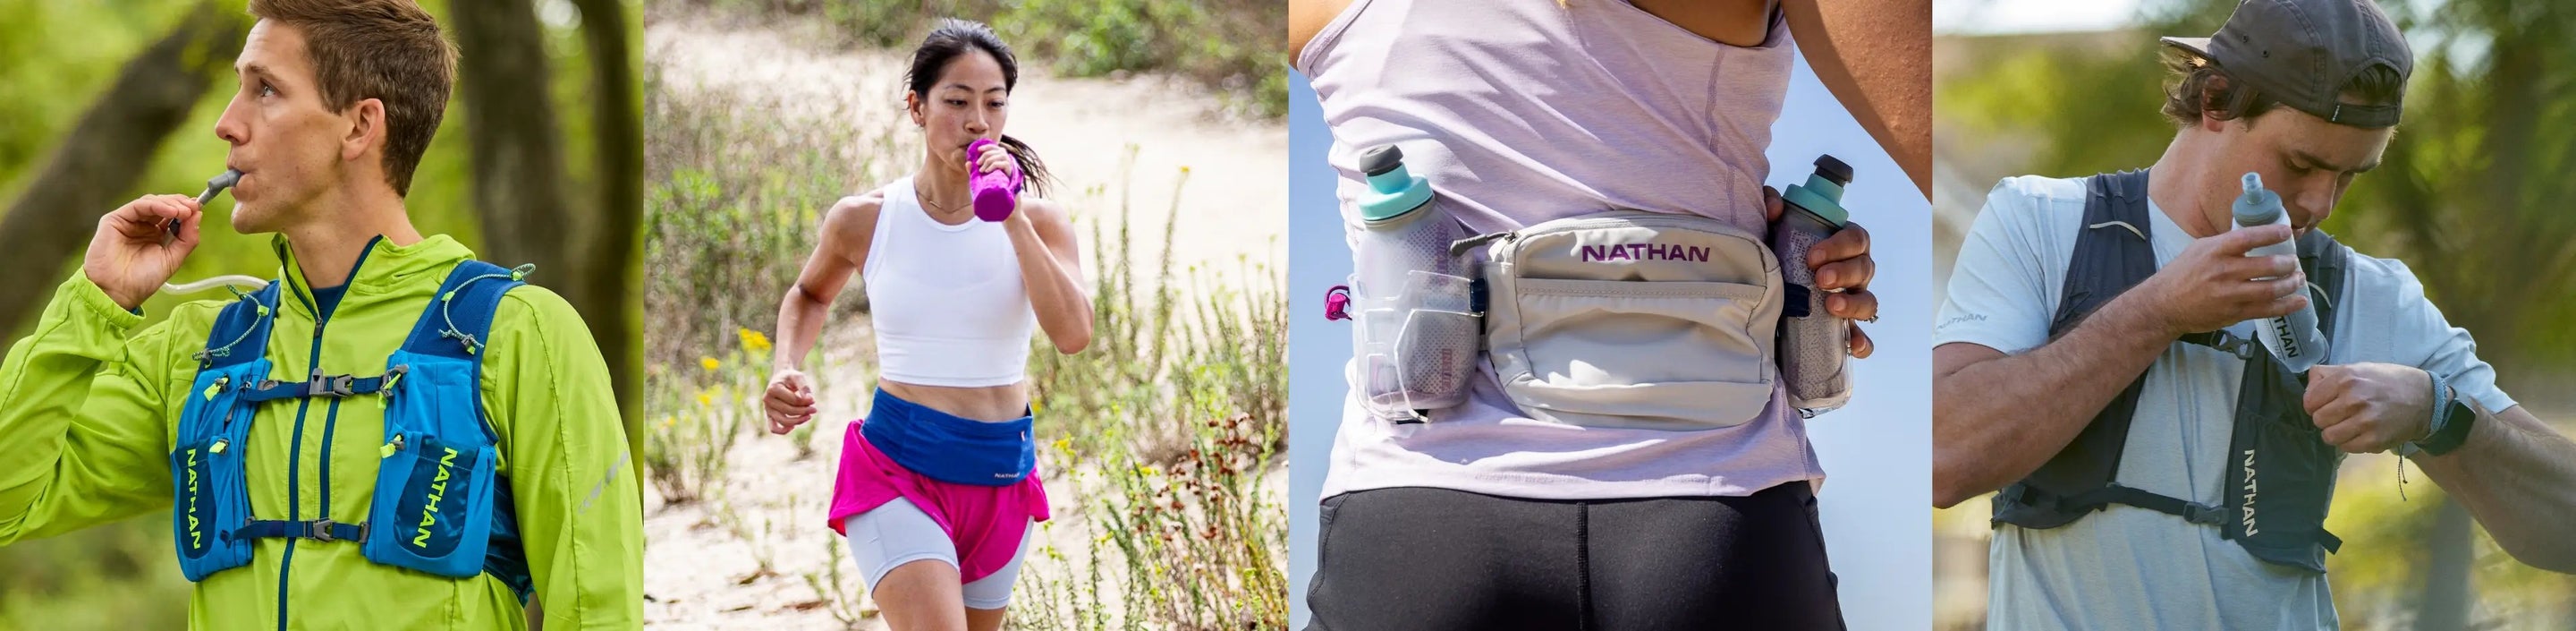 four images of runners using different Nathan Sports products. Hydration Pack & Jacket, tank top and shorts, hydration belt, and hydration vest